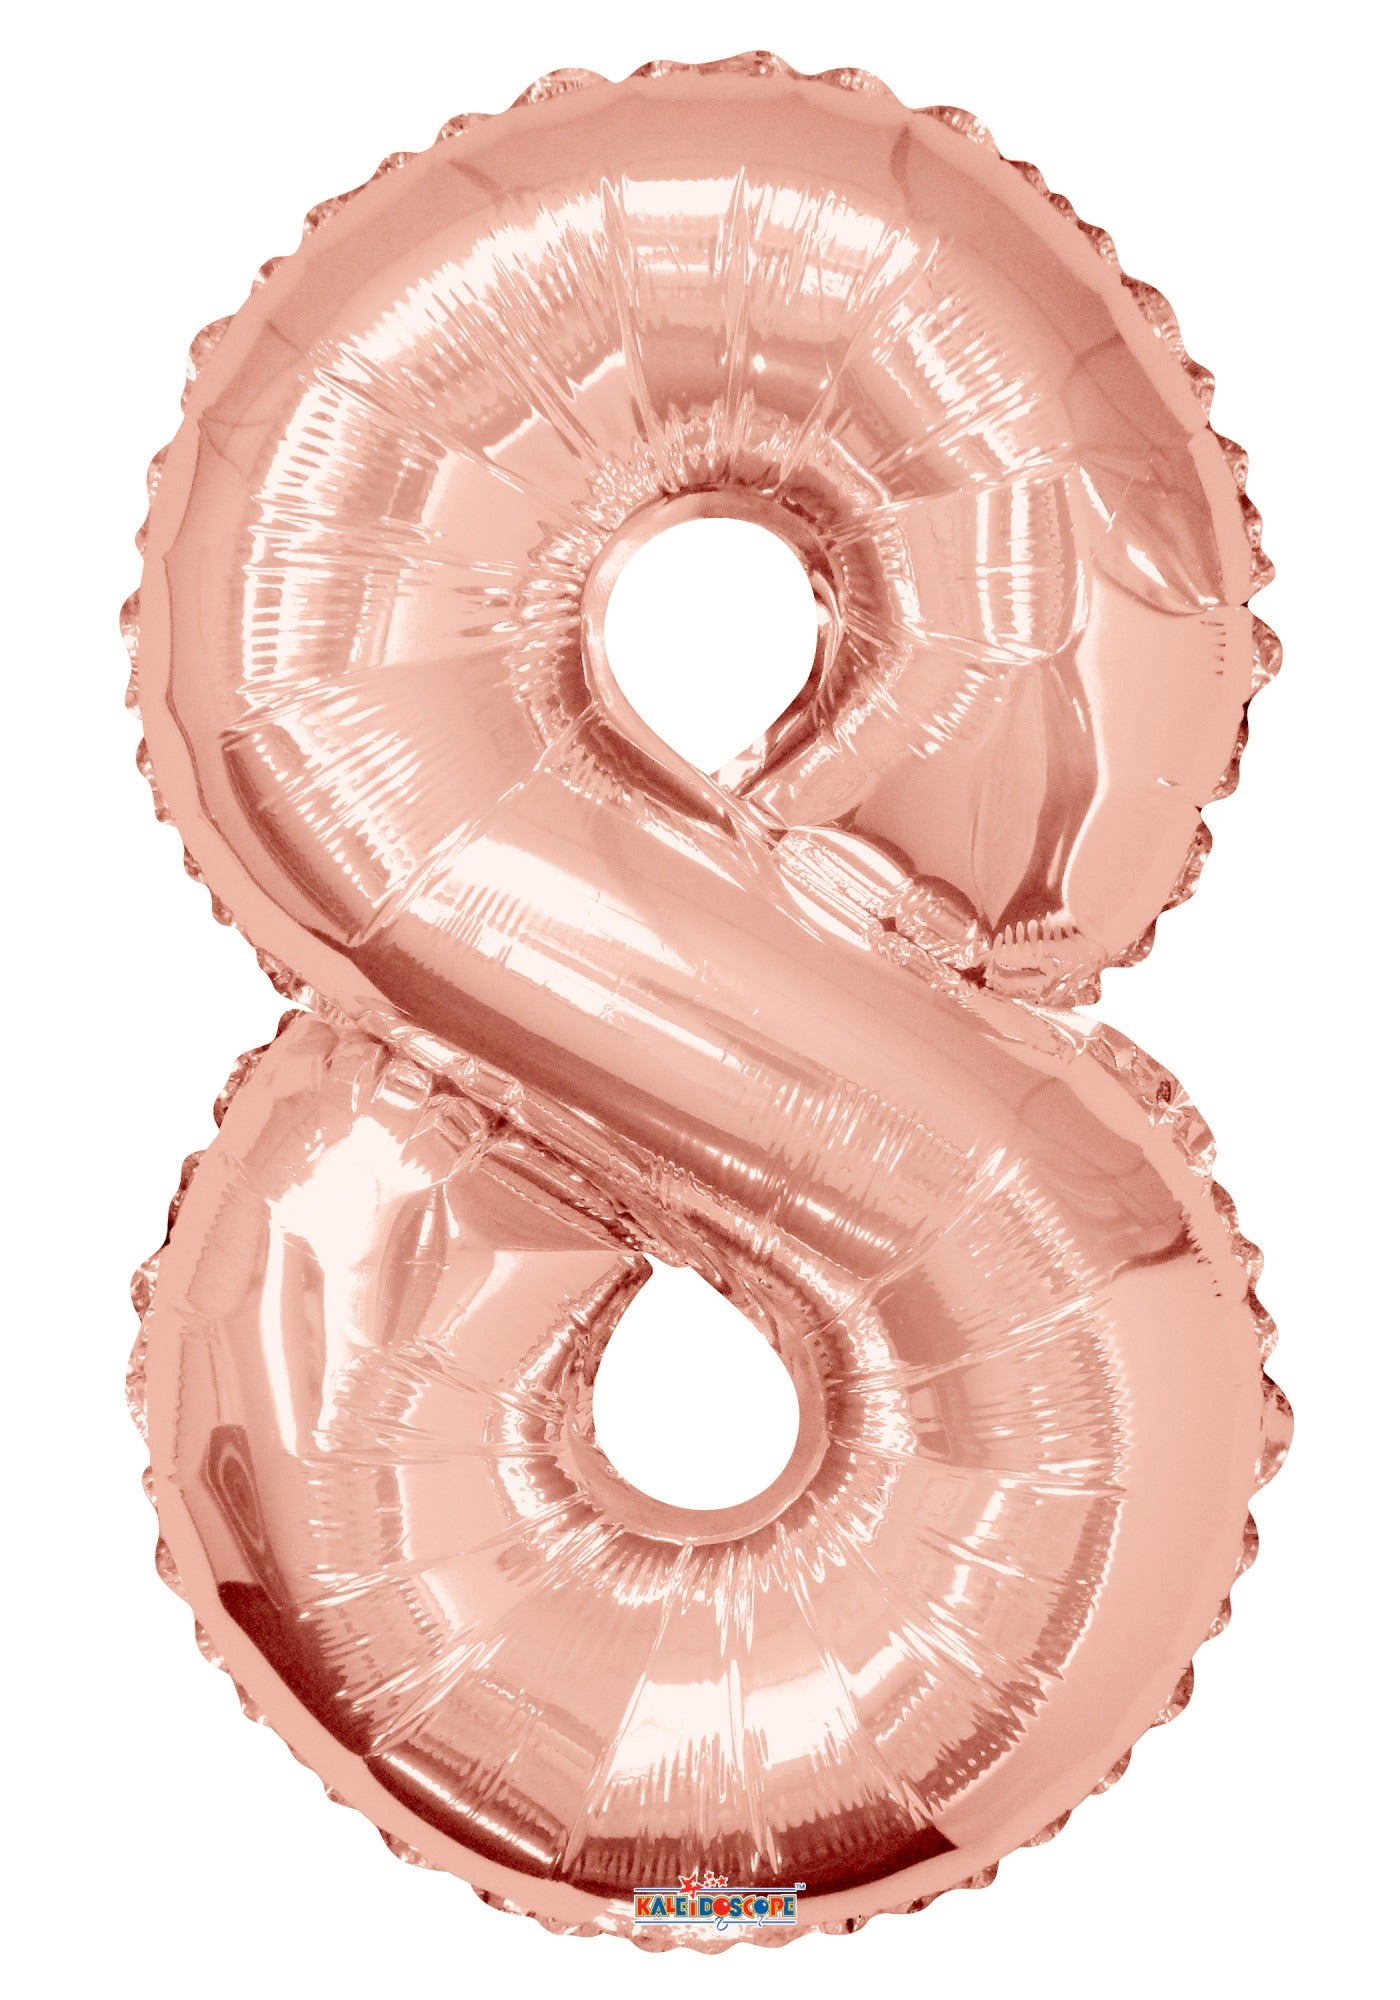 View 34 inch Number Balloon 8 Rose Gold information